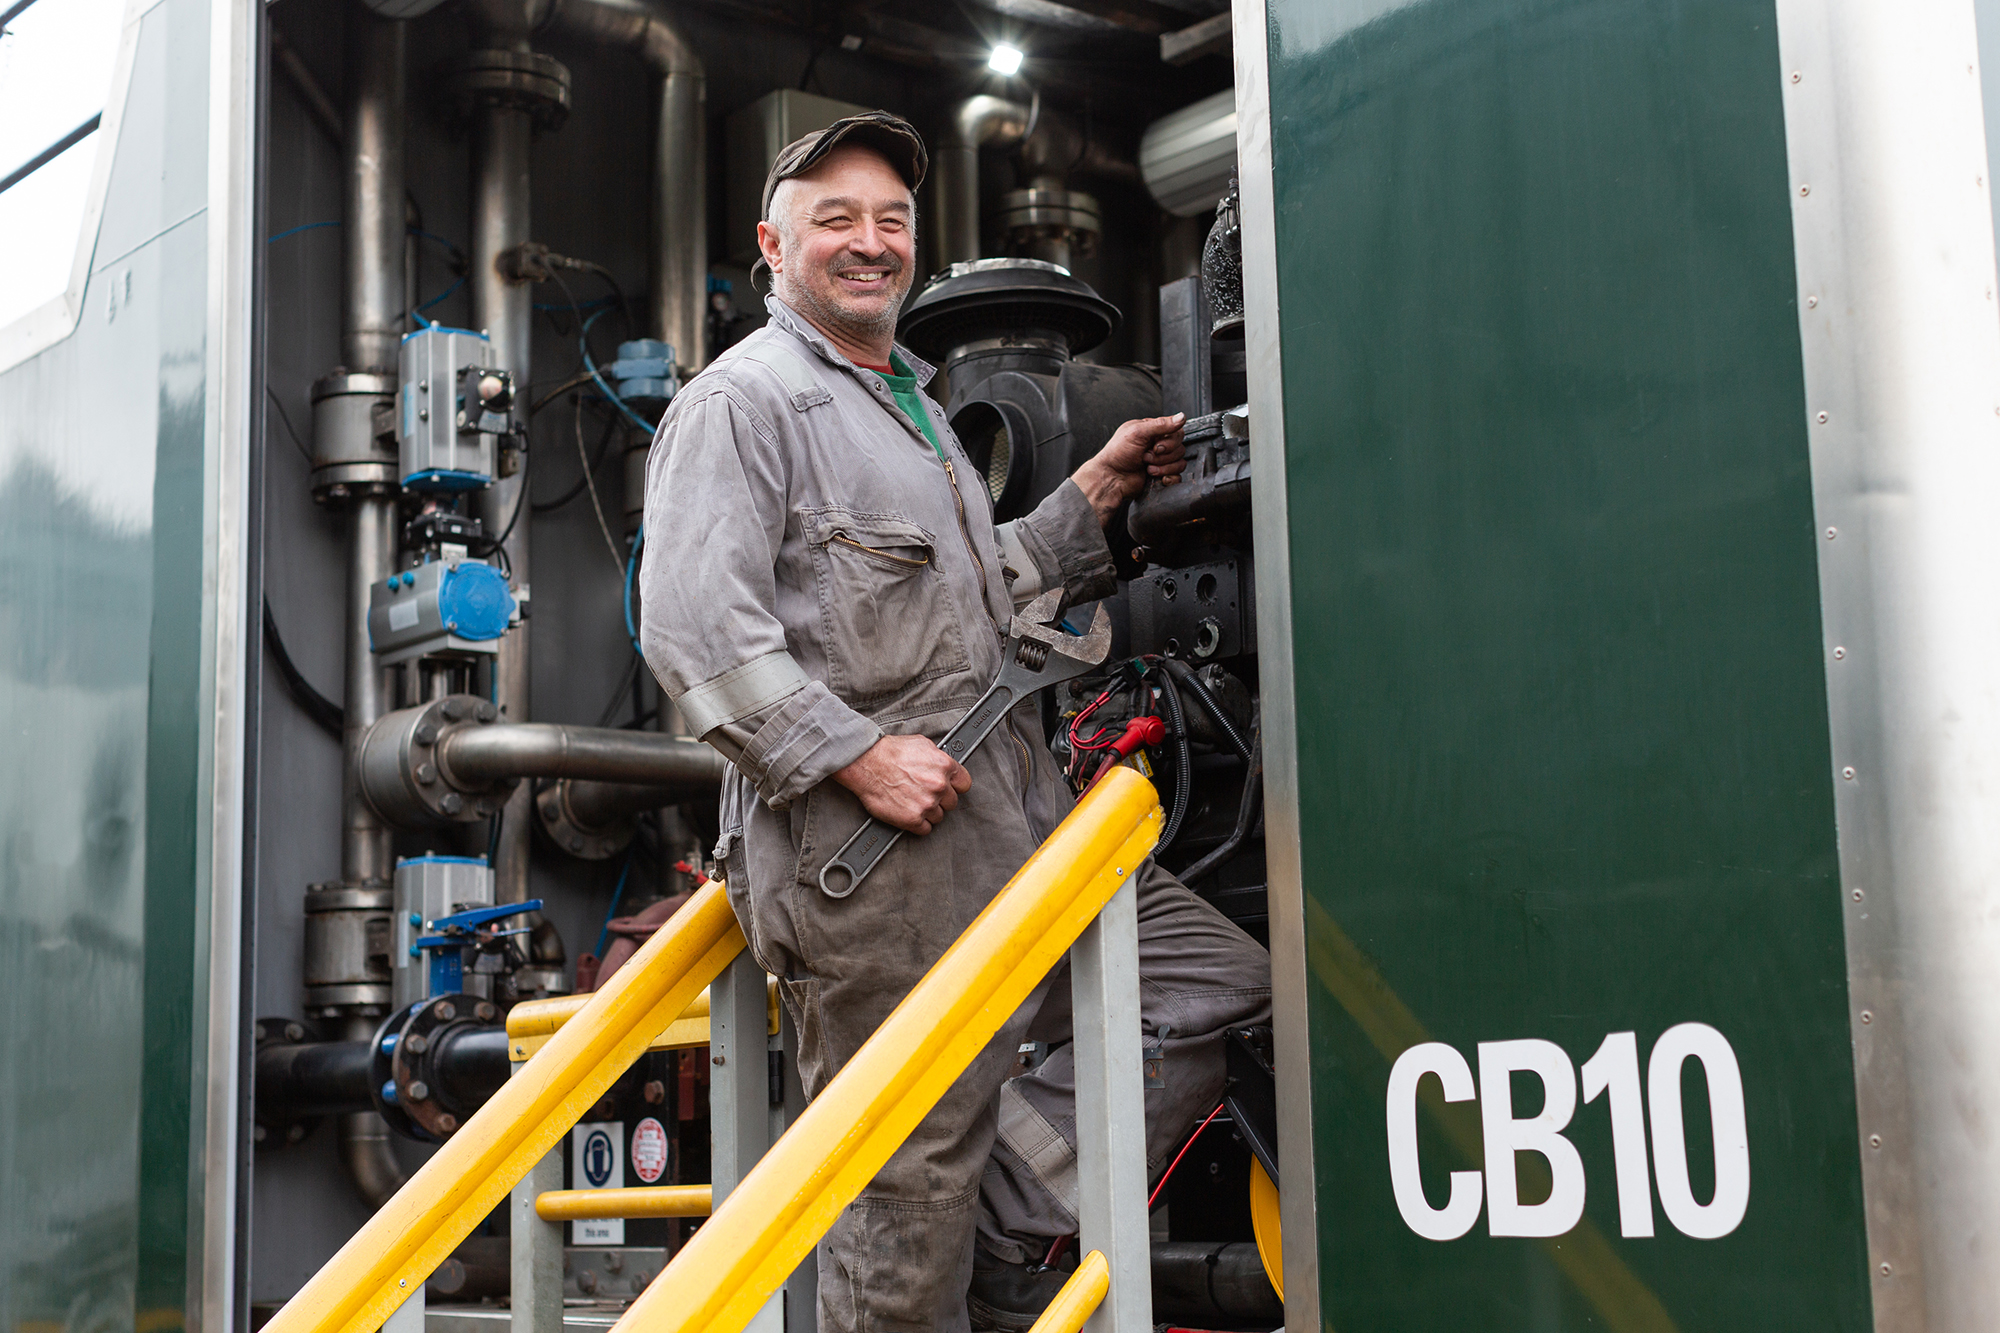 Cokebusters Senior Mechanic working on specialist double pumping unit CB10